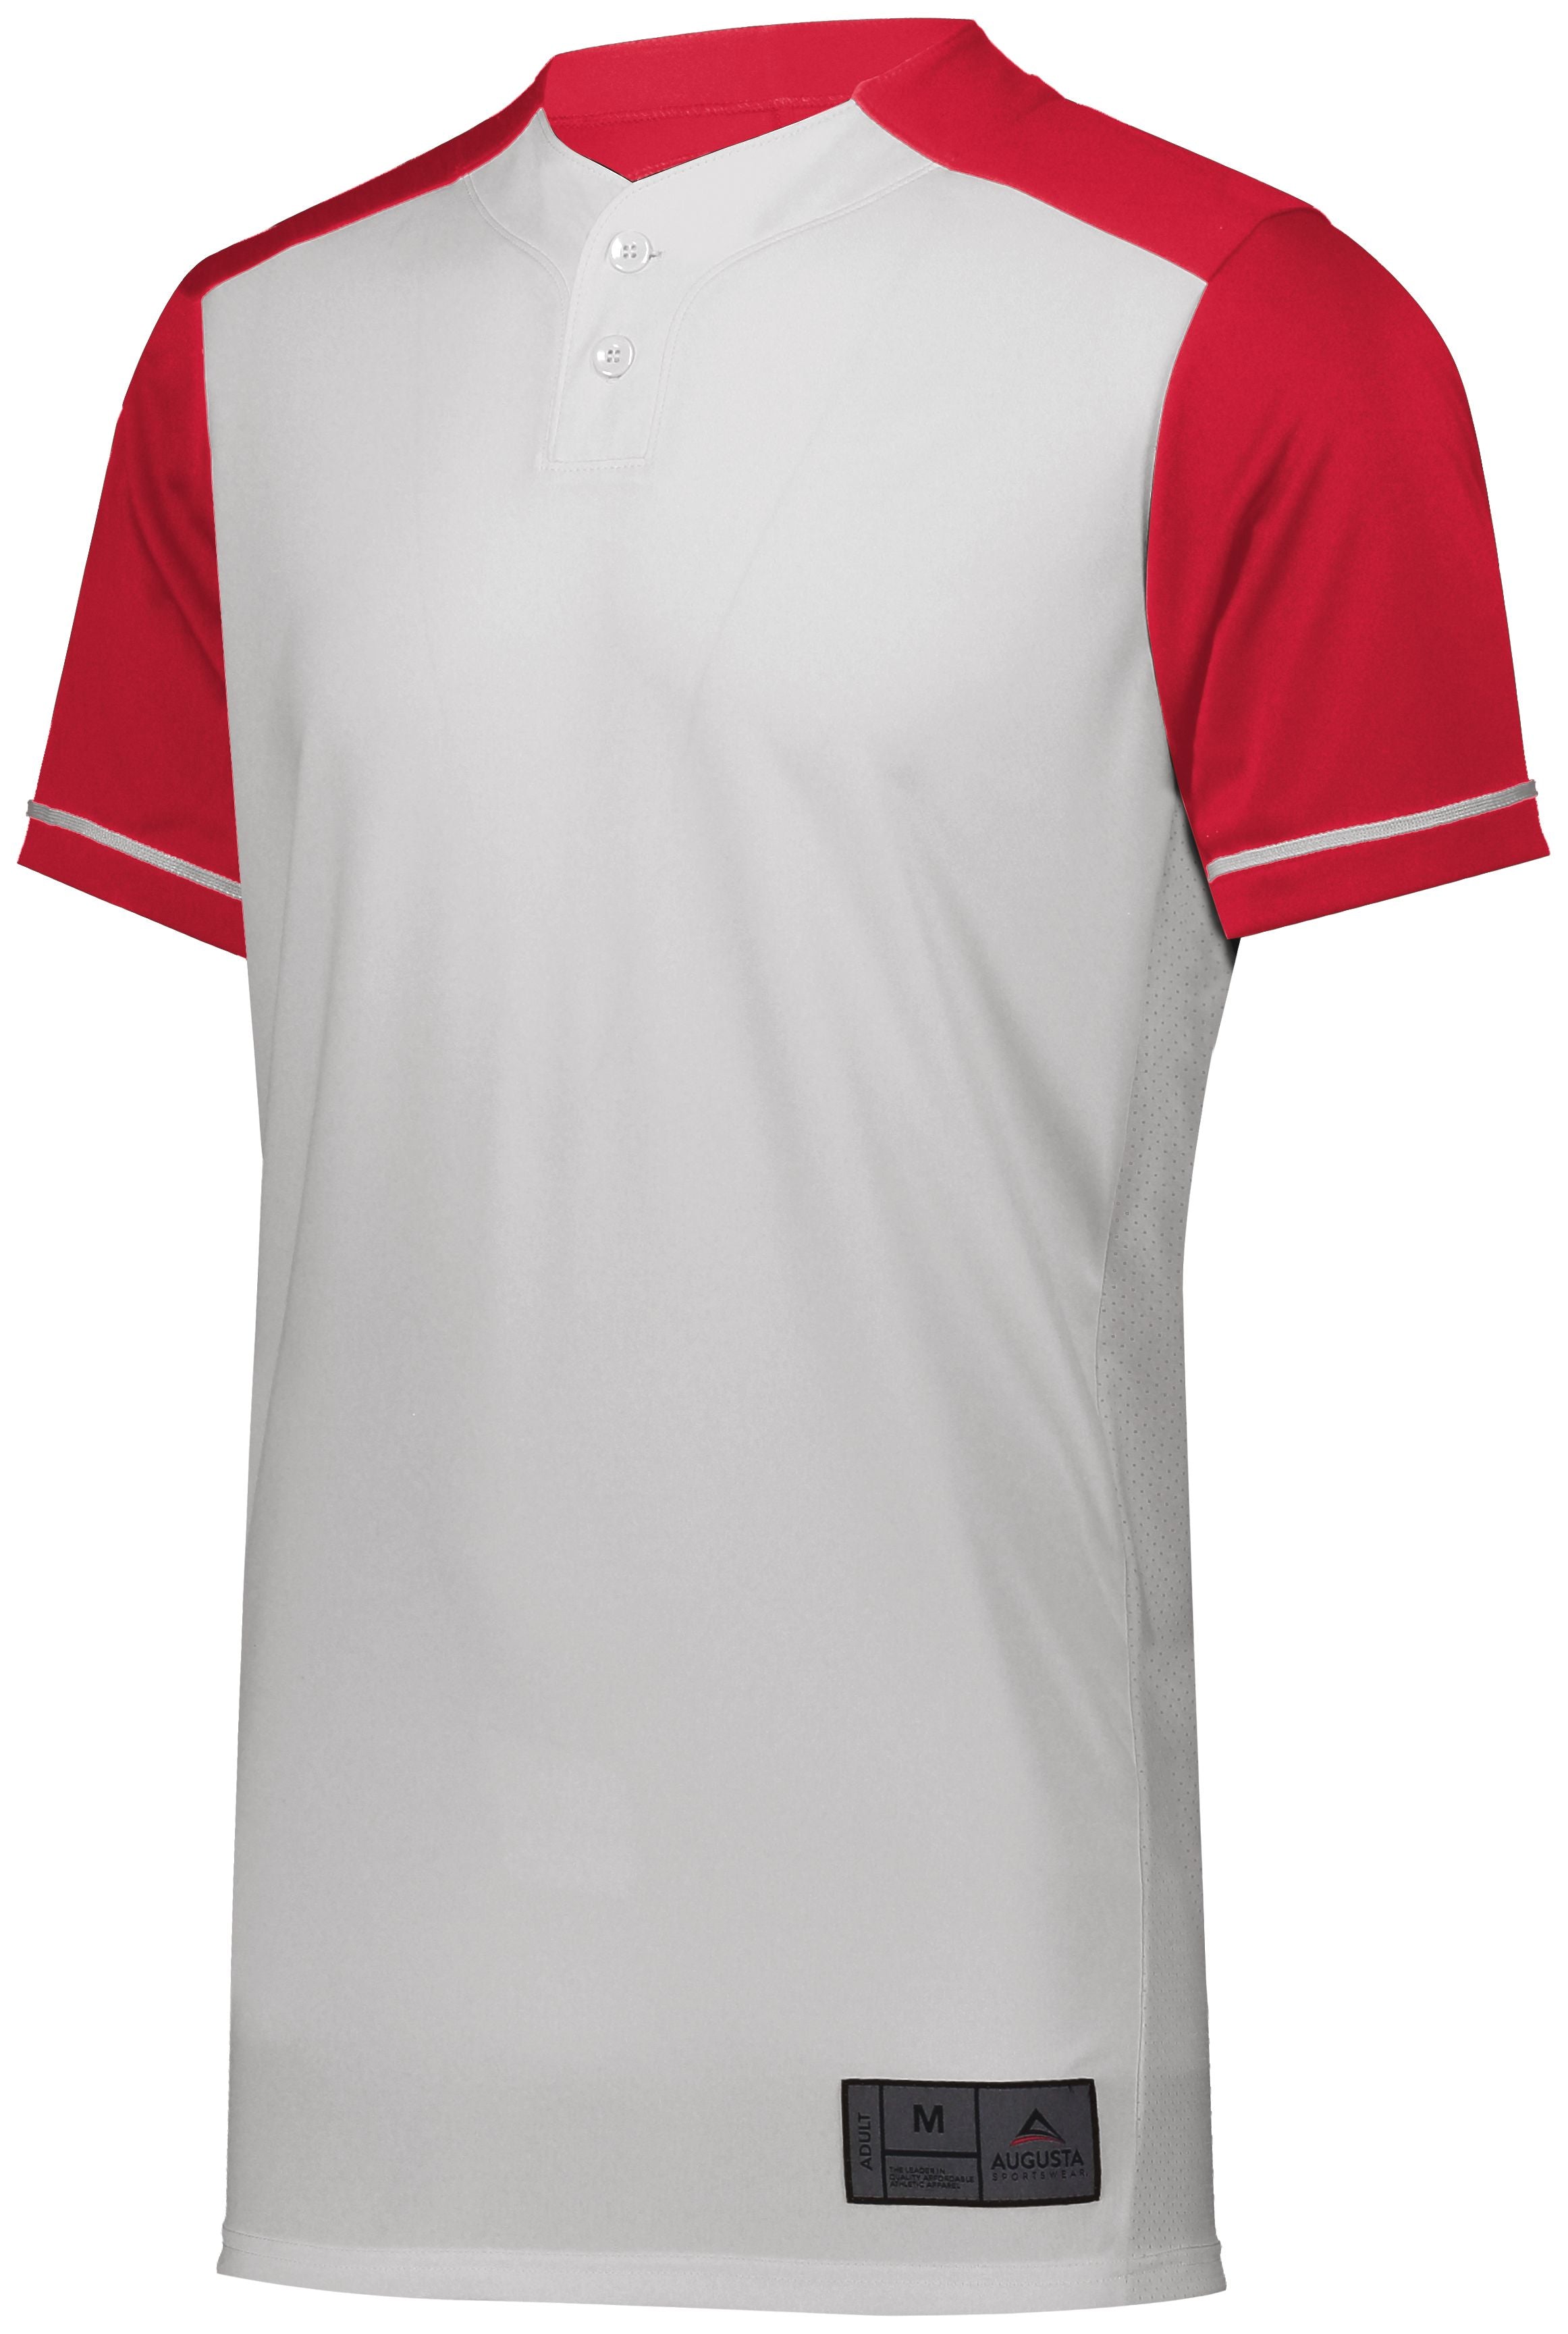 Augusta Sportswear Closer Jersey in White/Scarlet  -Part of the Adult, Adult-Jersey, Augusta-Products, Baseball, Shirts, All-Sports, All-Sports-1 product lines at KanaleyCreations.com